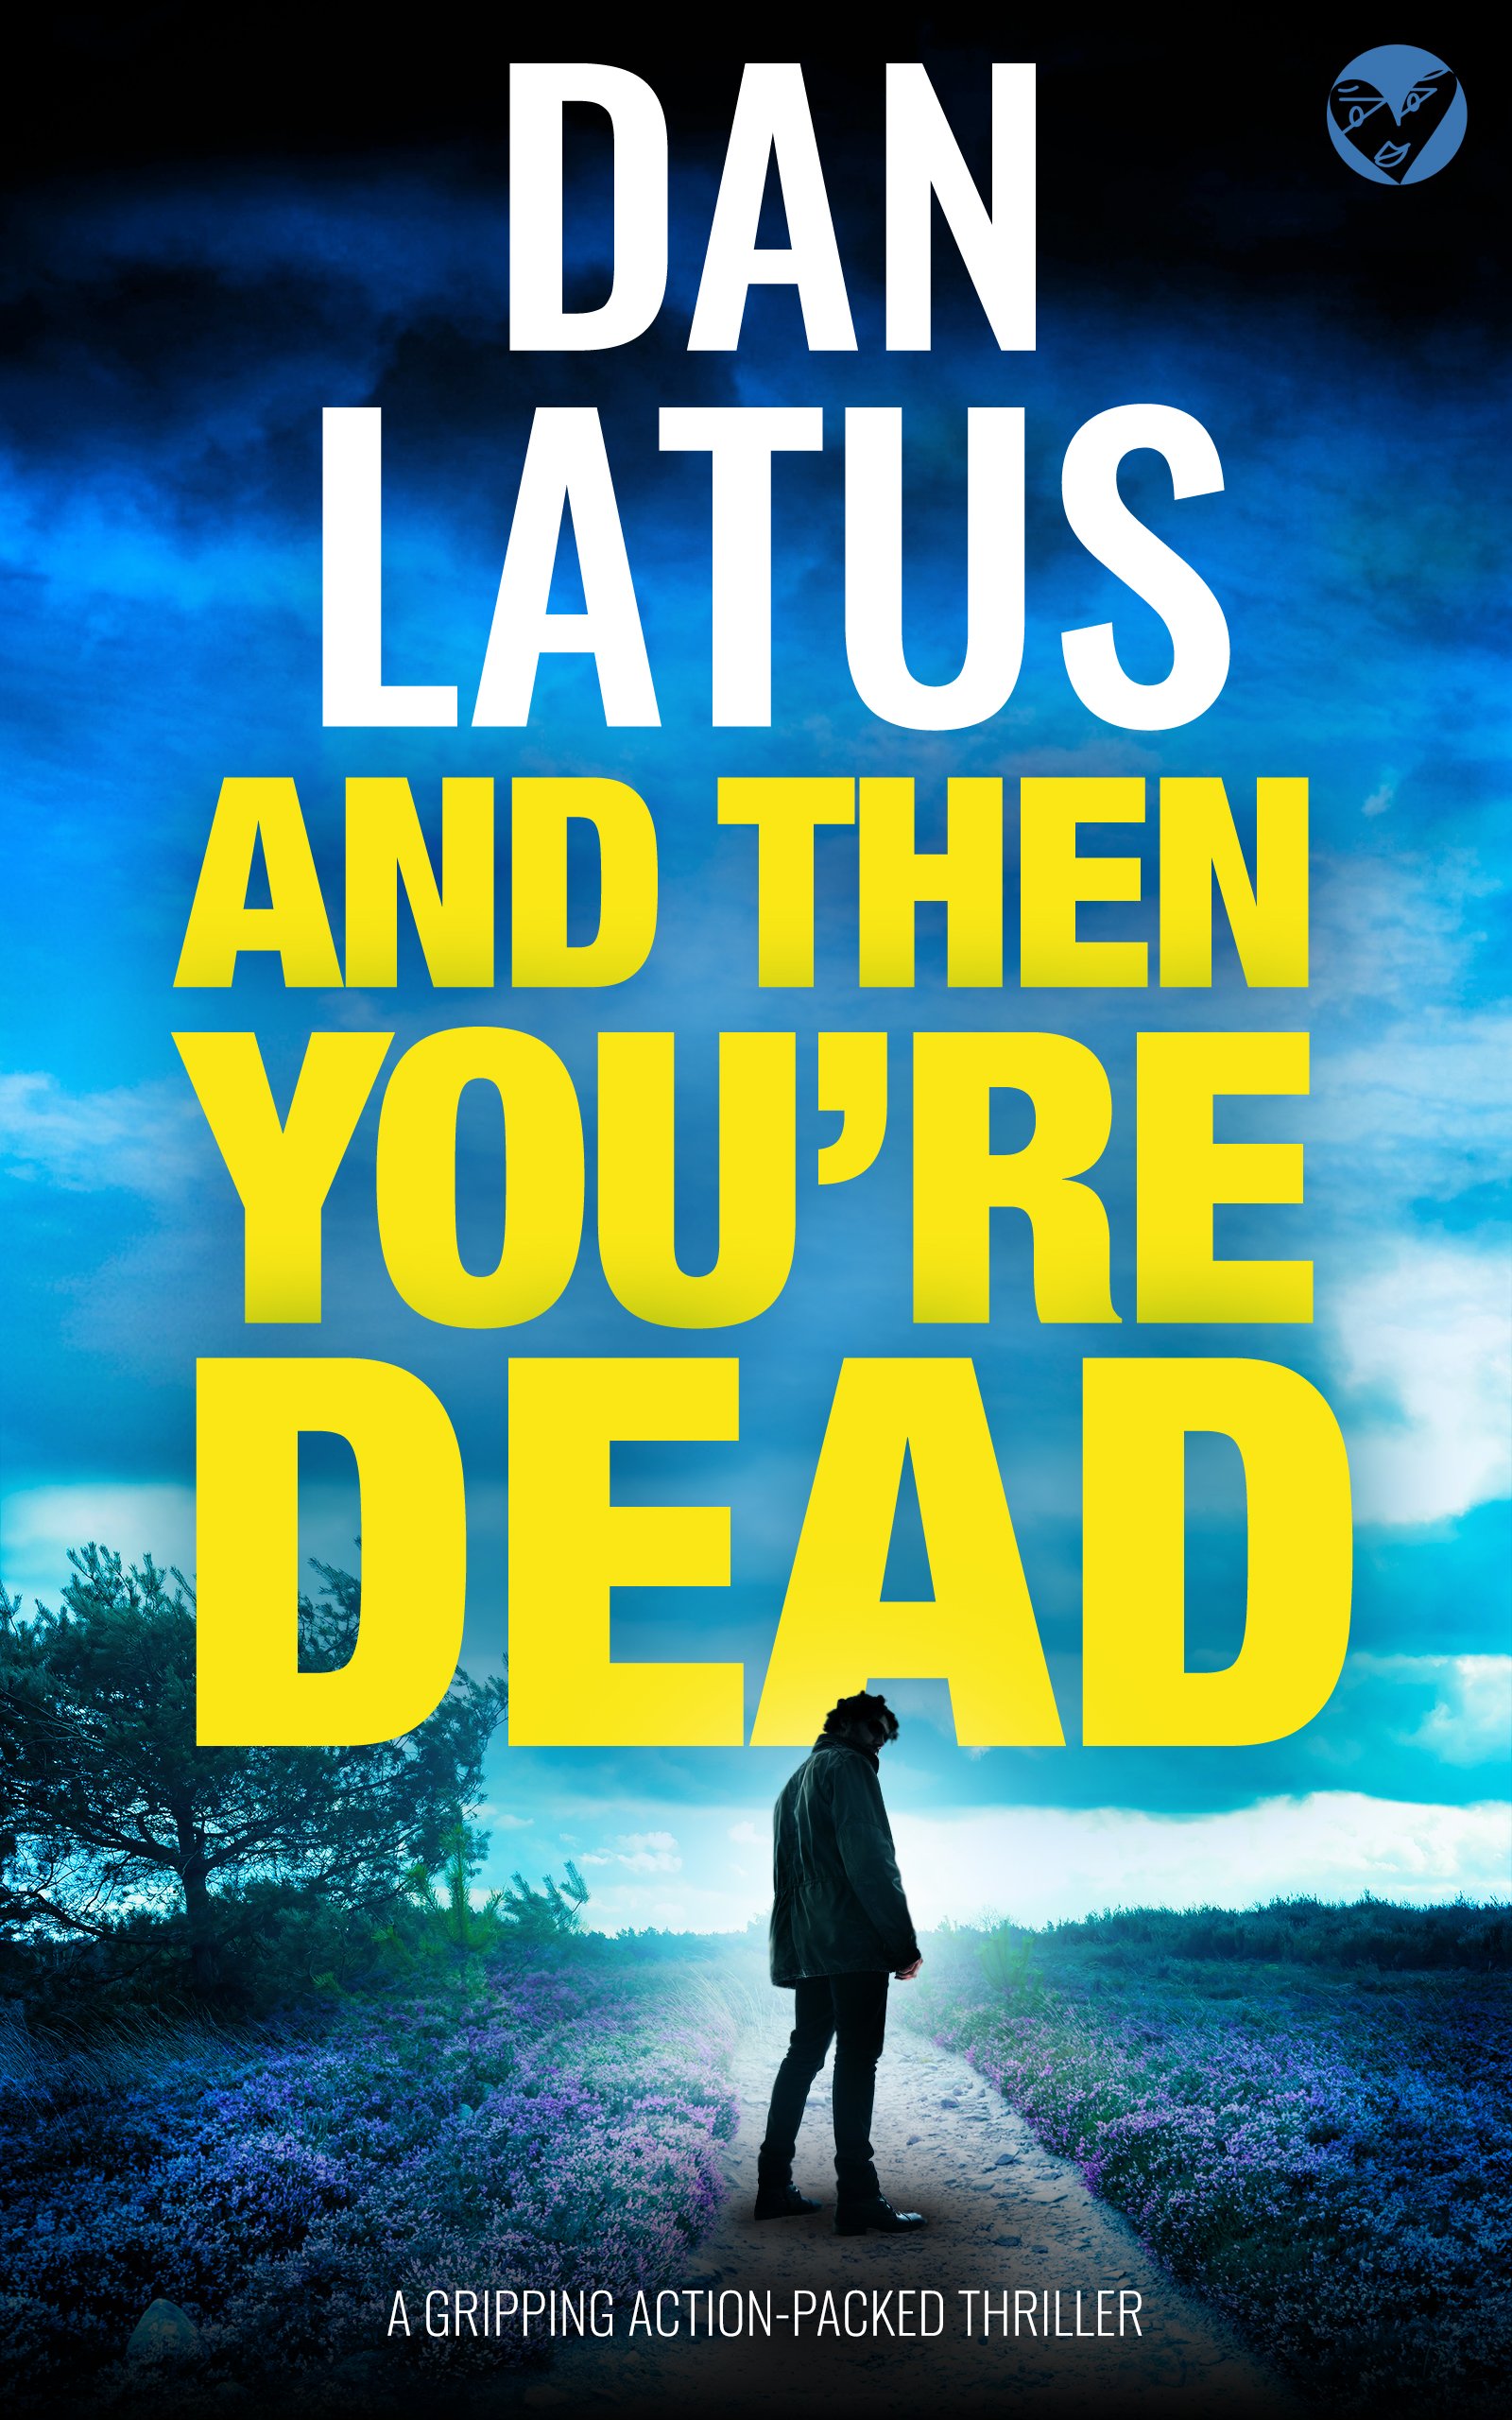 AND THEN YOURE DEAD Cover publish.jpg